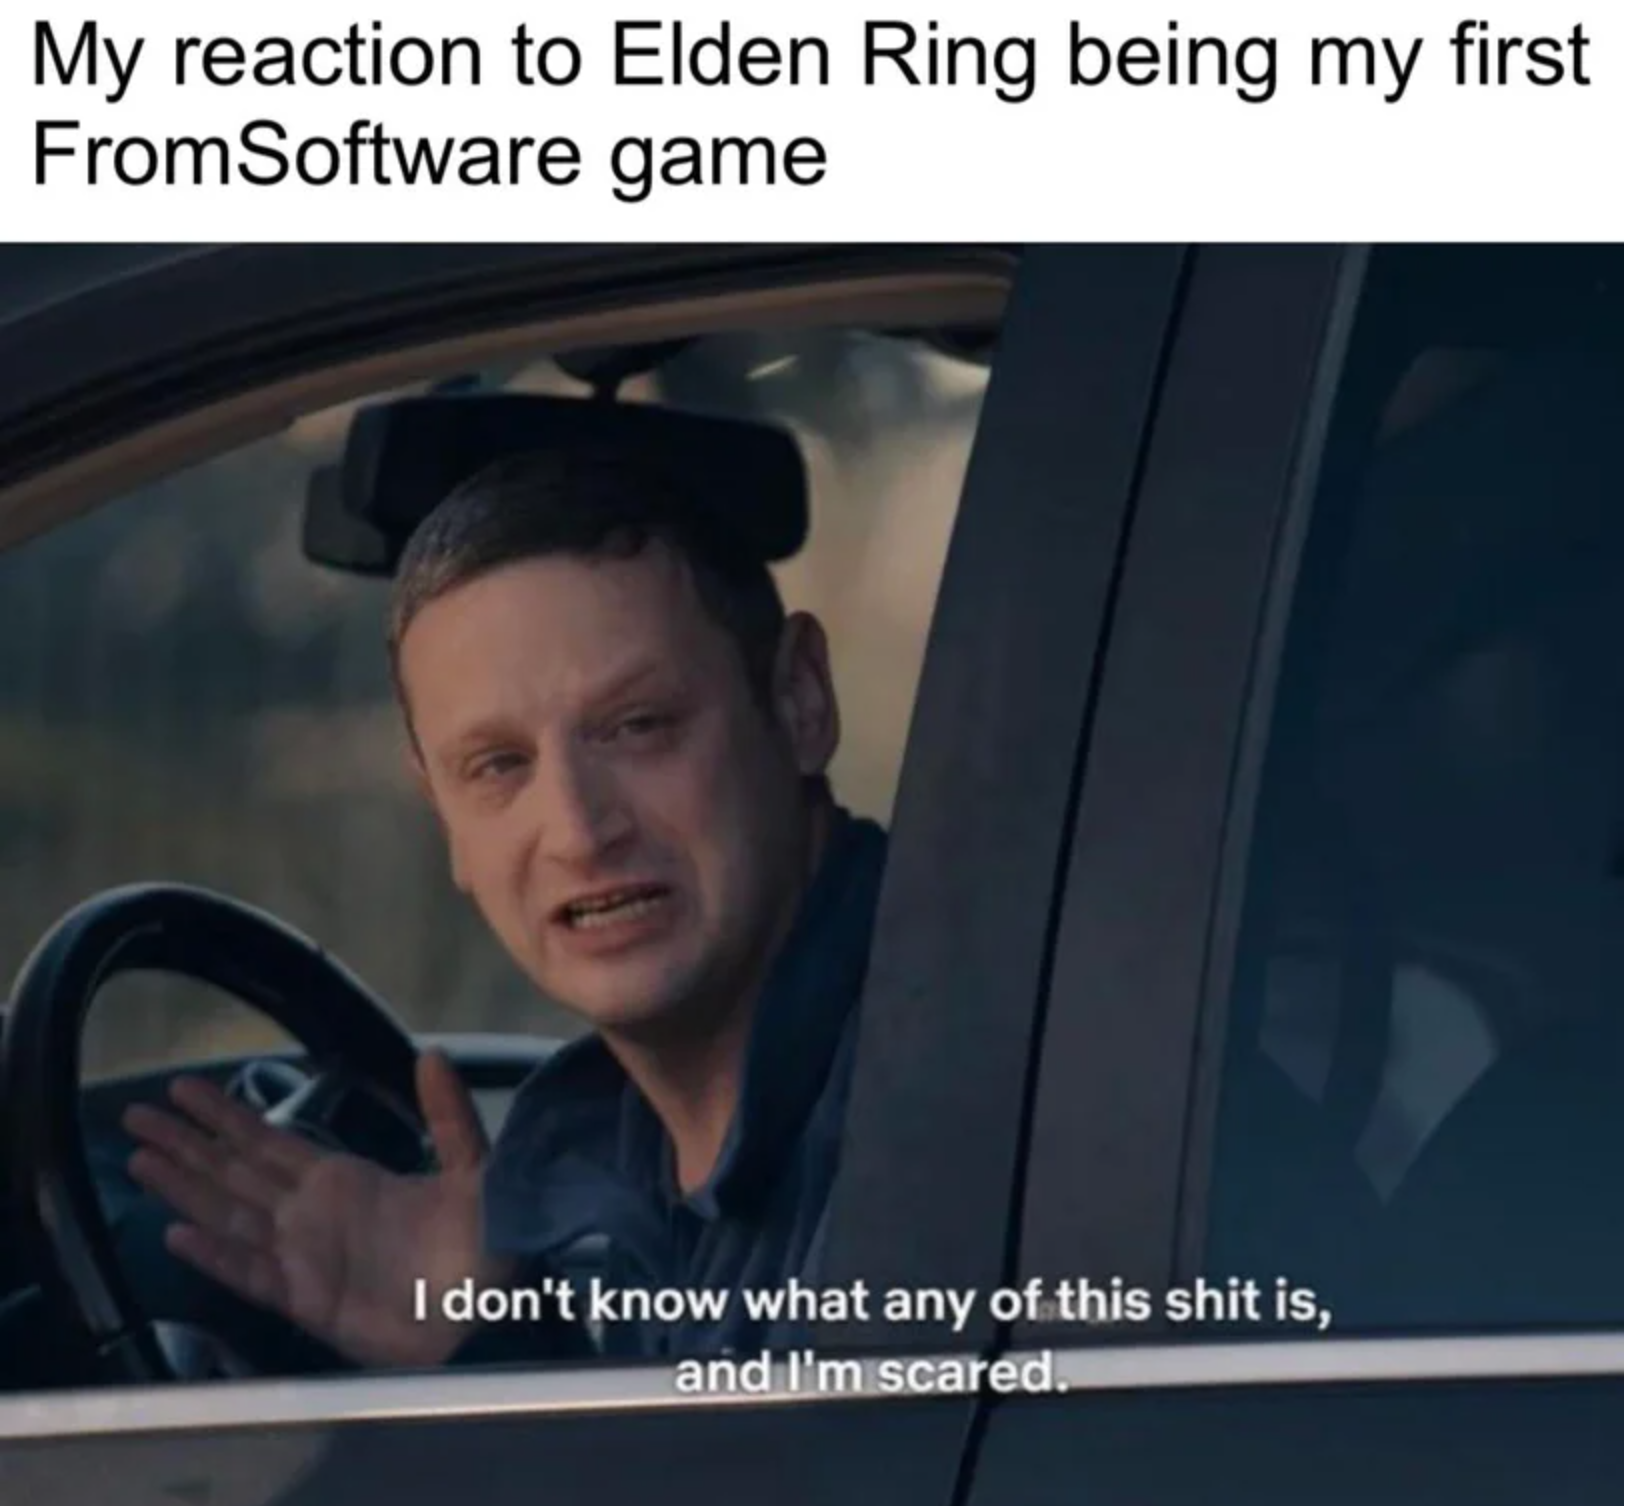 elden ring memes - think you should leave i dont know - My reaction to Elden Ring being my first FromSoftware game I don't know what any of this shit is, and I'm scared.